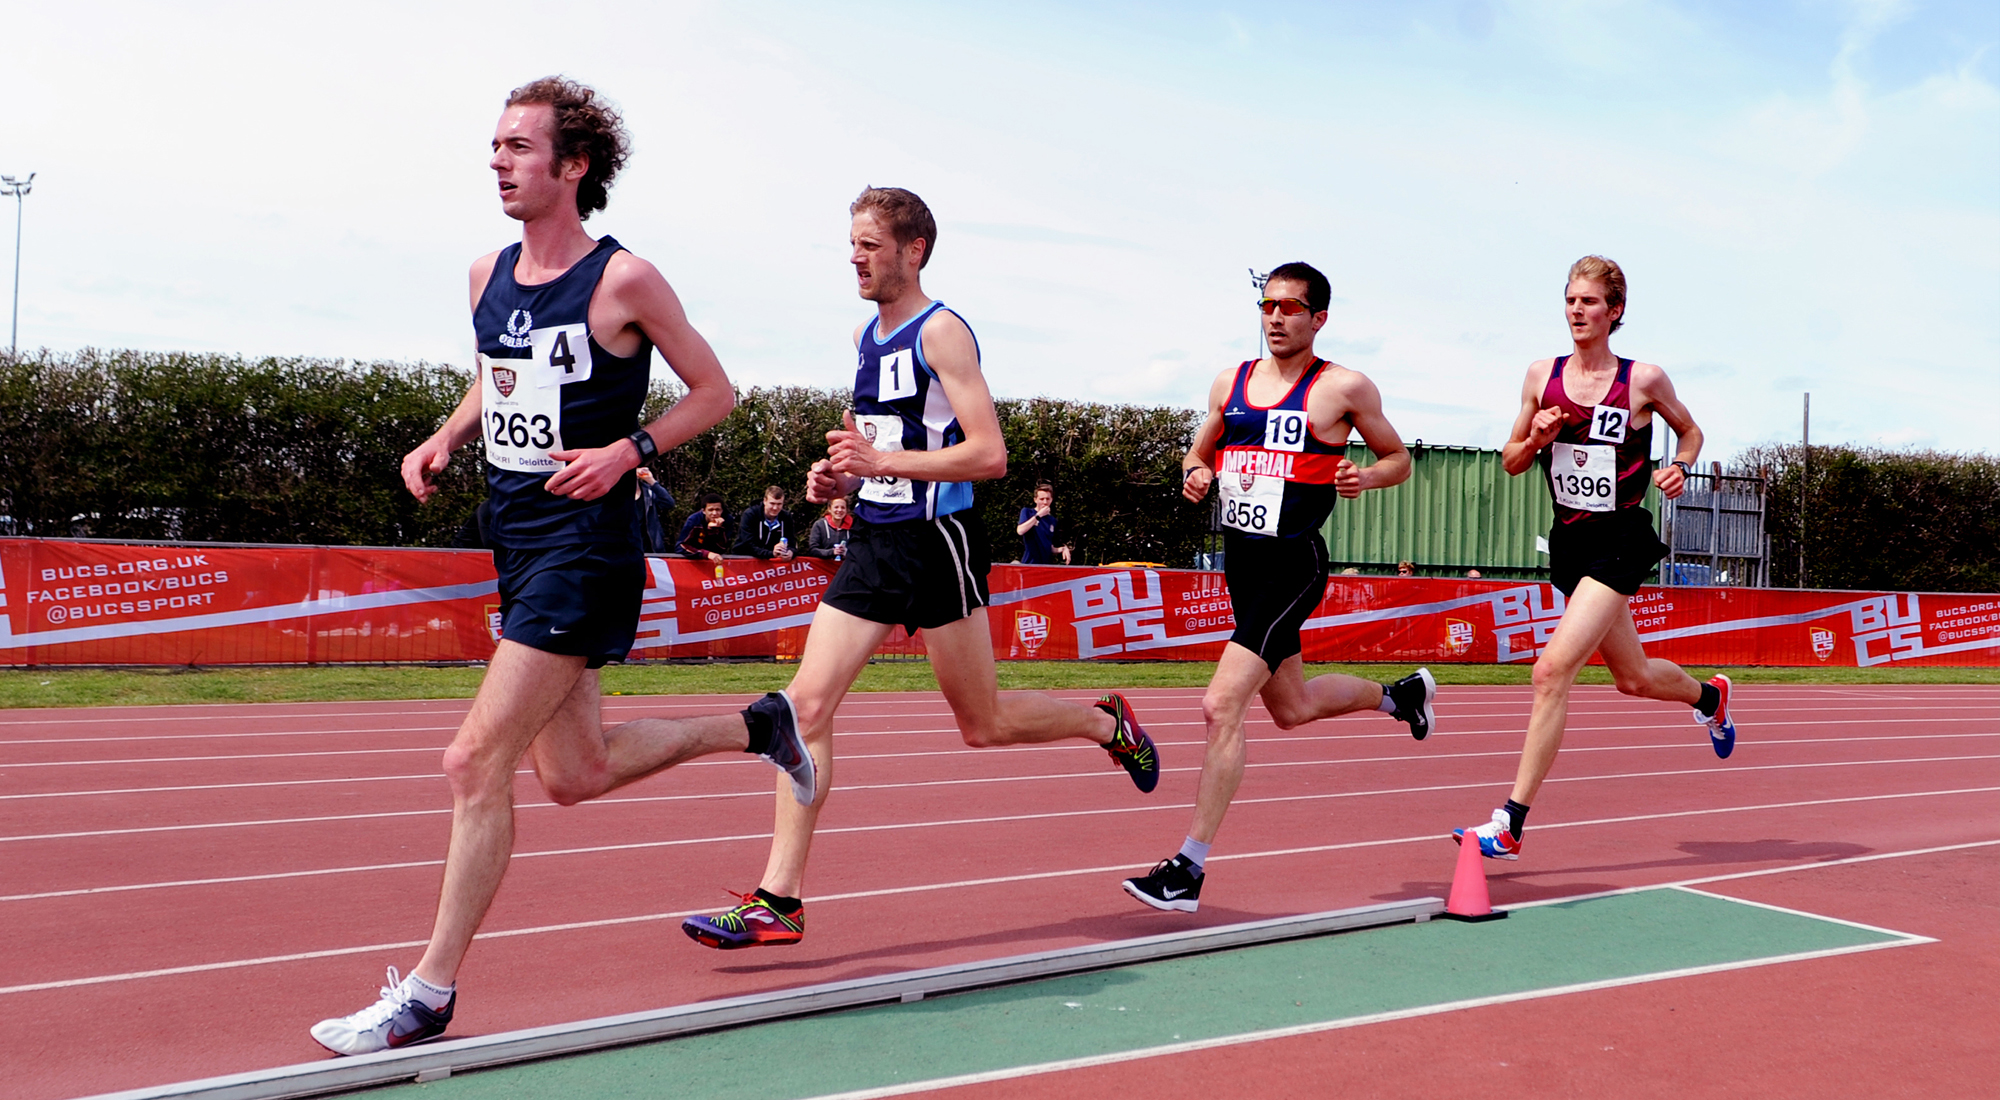 Athlete's guide to life at university - Athletics & Running.